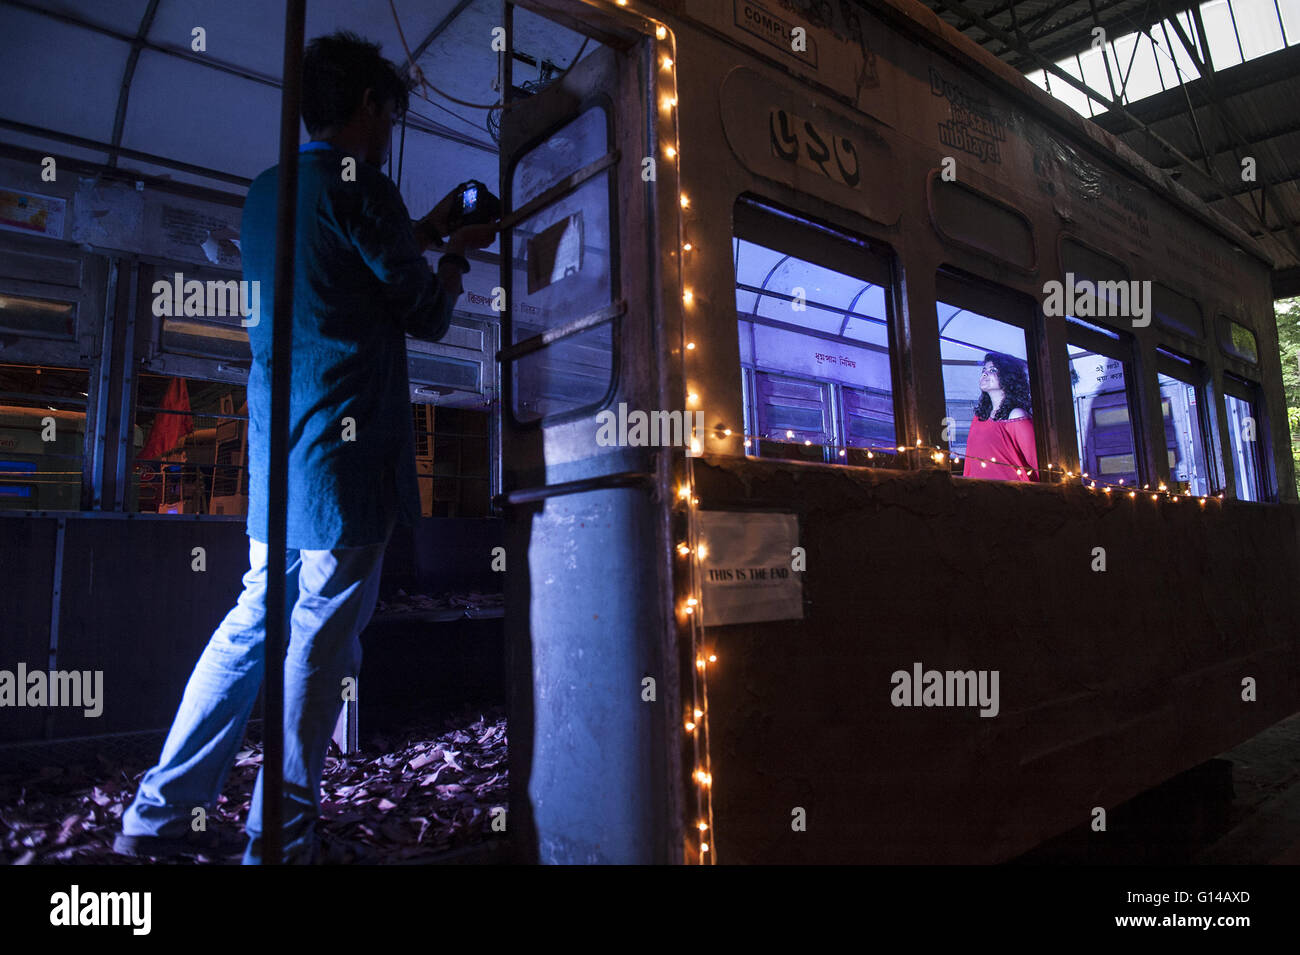 Kolkata, Indian state West Bengal. 8th May, 2016. A girl poses inside a tramcar during the two-day event Tram Tales at a tram depot in Kolkata, capital of eastern Indian state West Bengal, May 8, 2016. Tram Tales was planned as a unique mixed - media interactive visual installation piece using videos, music, photography, games, food and interaction to celebrate the nostalgia of trams as a symbol of Kolkata's rich colonial-era heritage. The event was held from May 7 to 8. © Tumpa Mondal/Xinhua/Alamy Live News Stock Photo